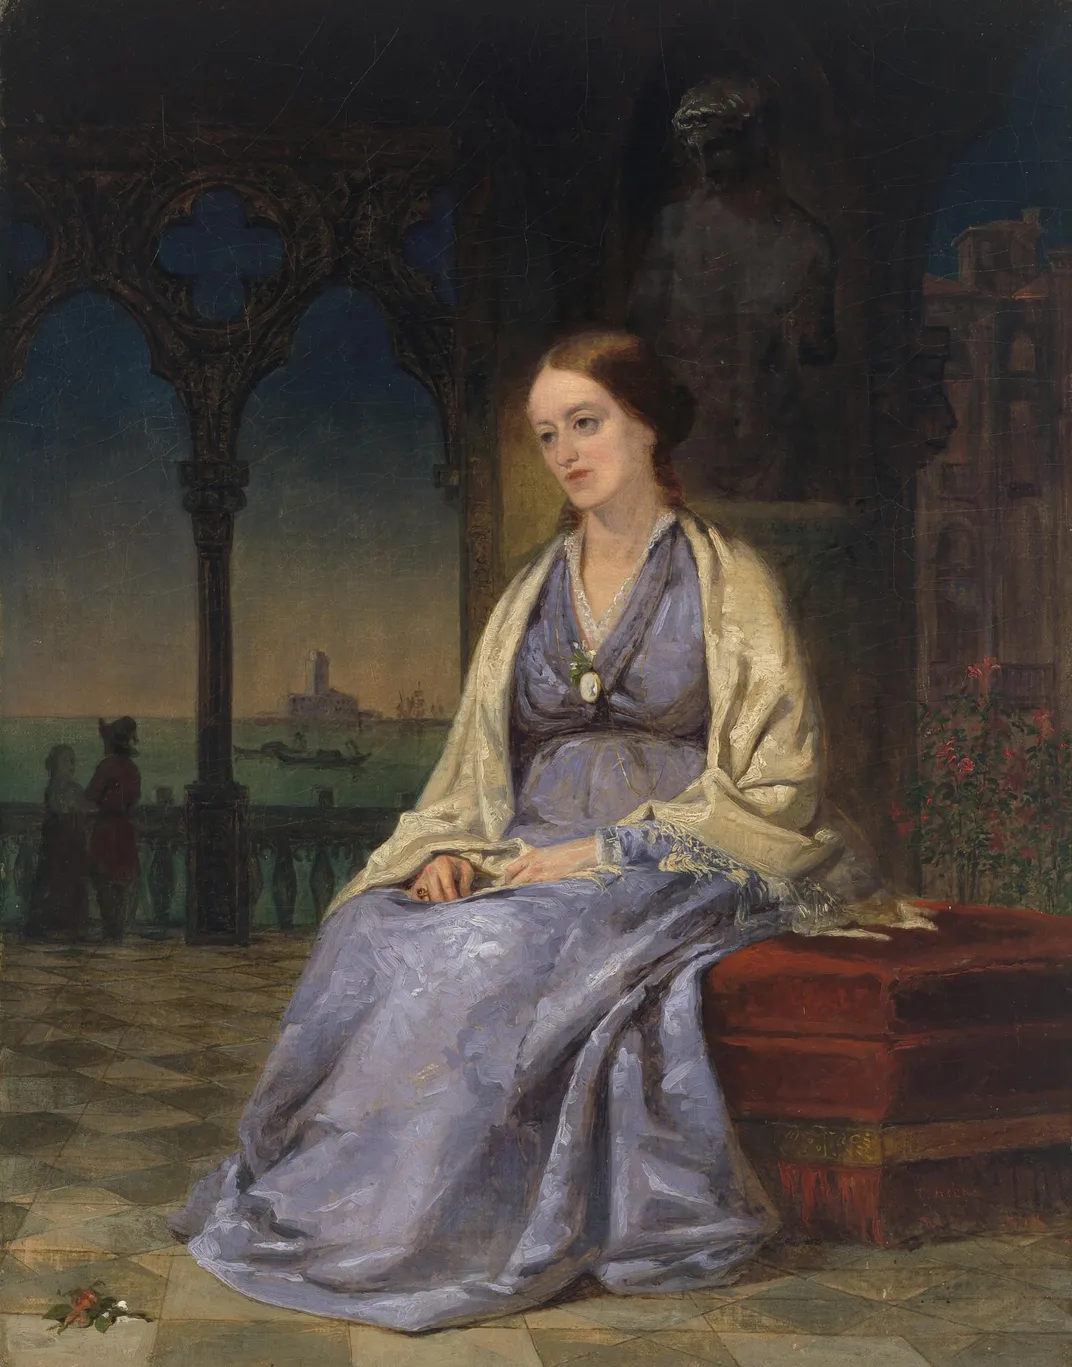 A portrait of Margaret, a white woman with dark blonde hair, seated with hands in her land and wearing a periwinkle dress, with a harbor and ships in the background